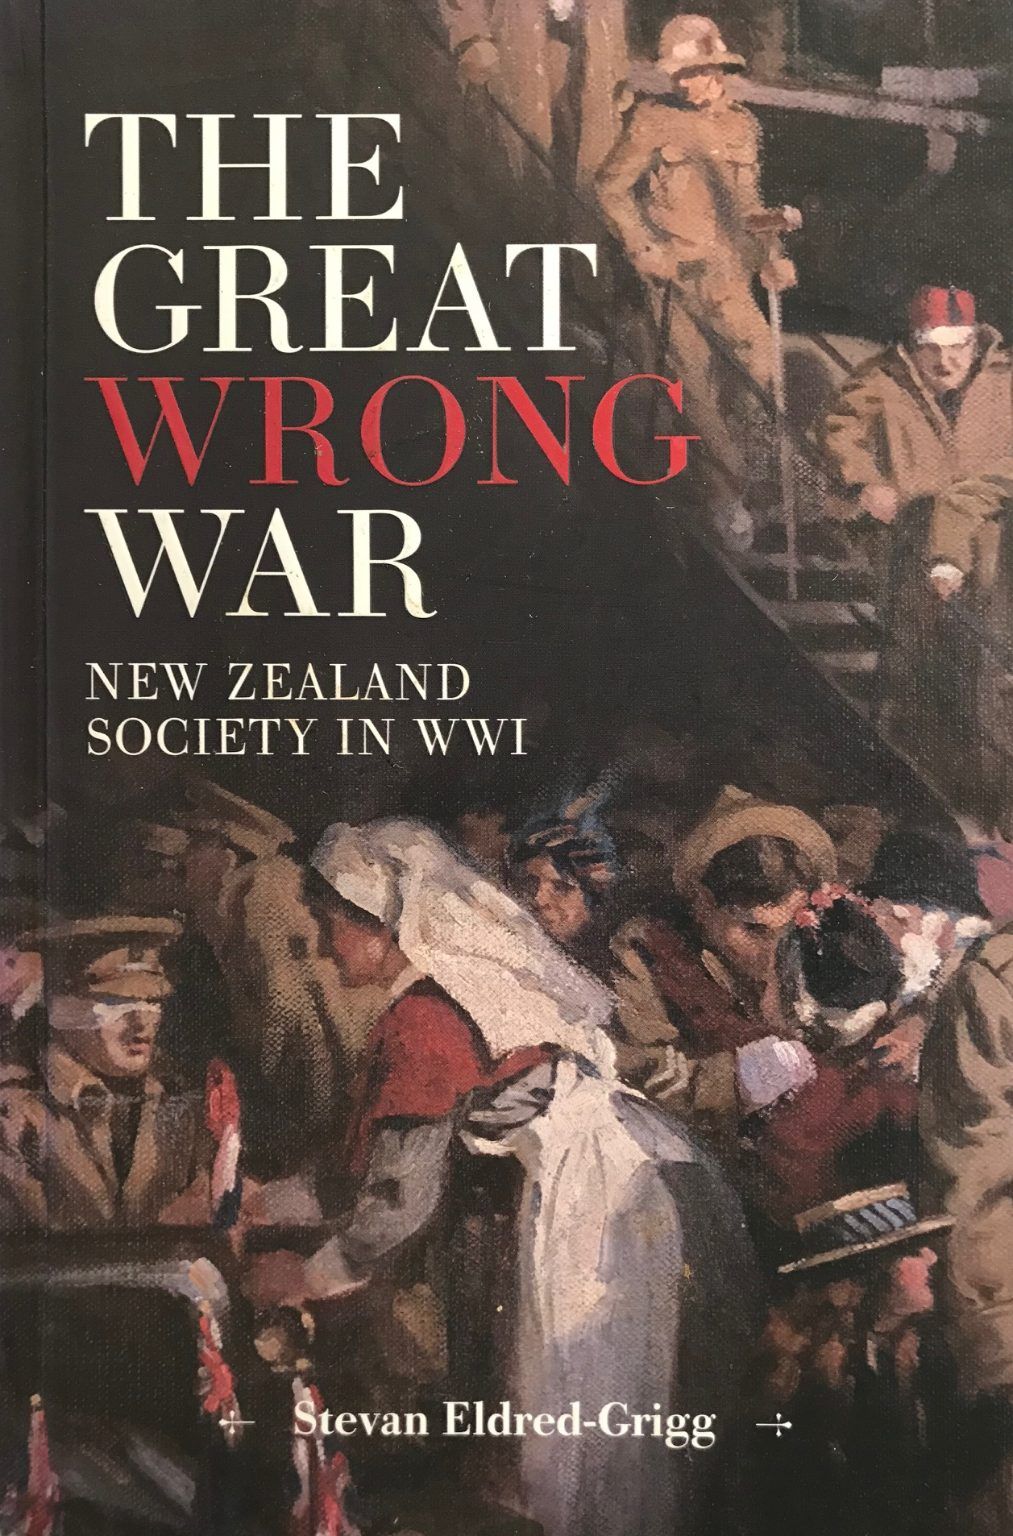 THE GREAT WRONG WAR: New Zealand Society In WW I